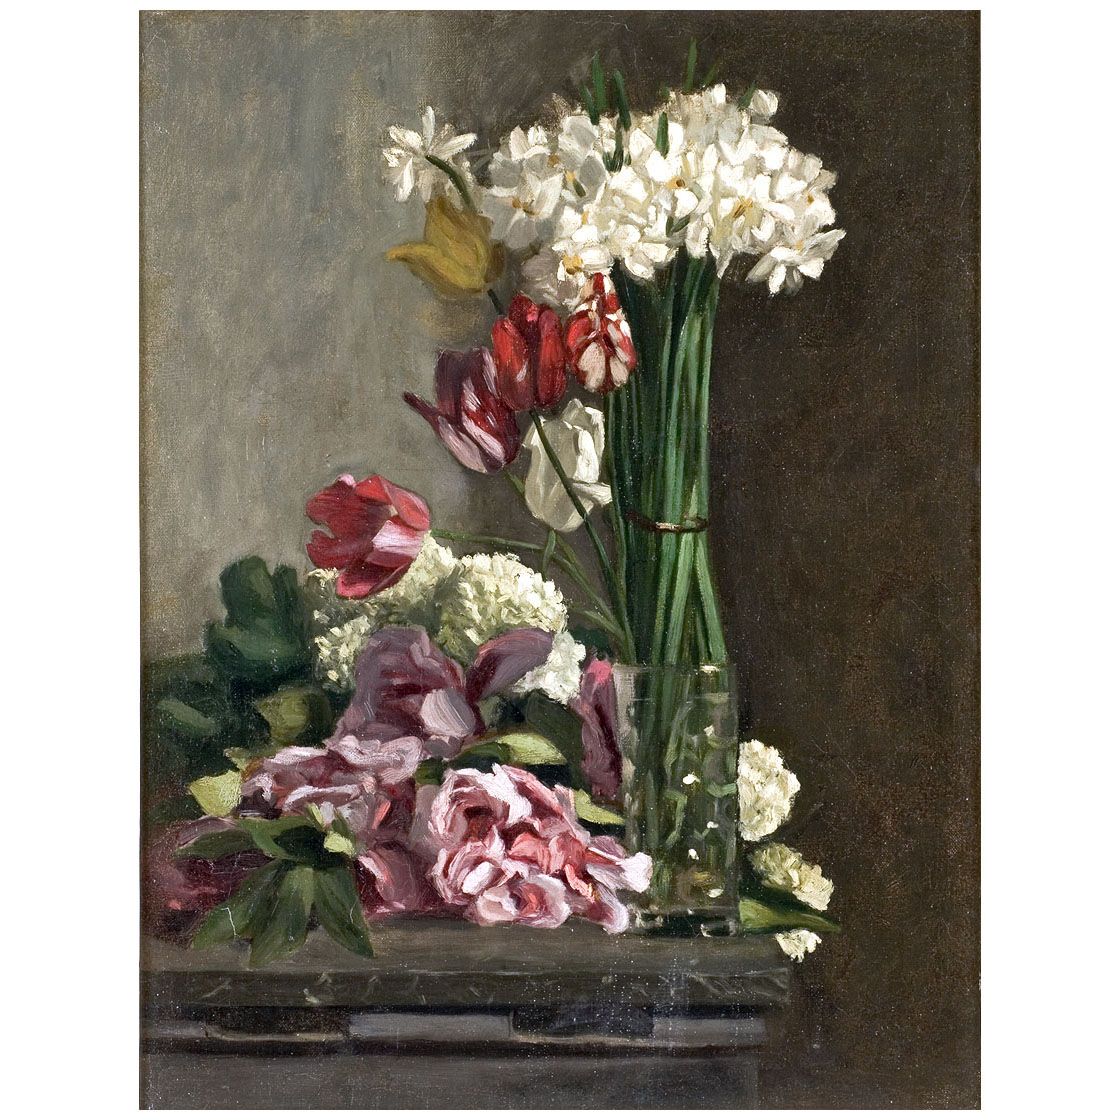 Frederic Bazille. Fleurs. 1869-1870. Musee Fabre, Montpellier